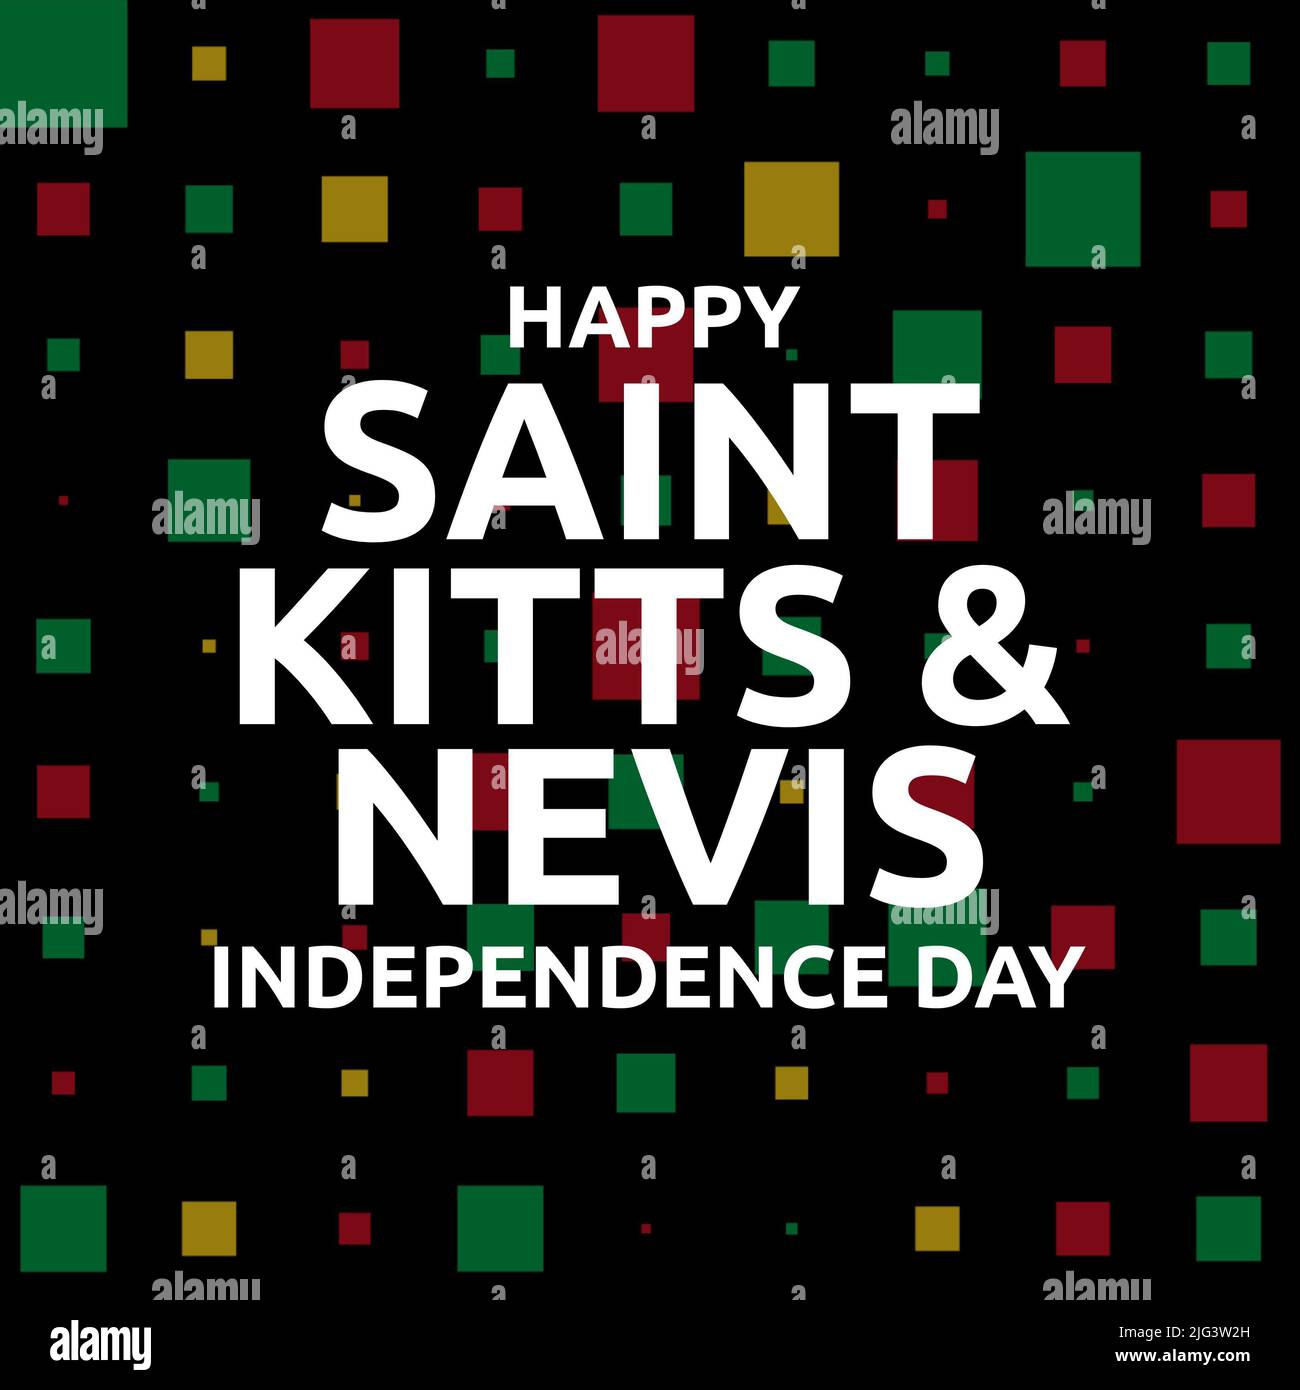 Image of saint kitts and nevis independence day on black background with squares Stock Photo